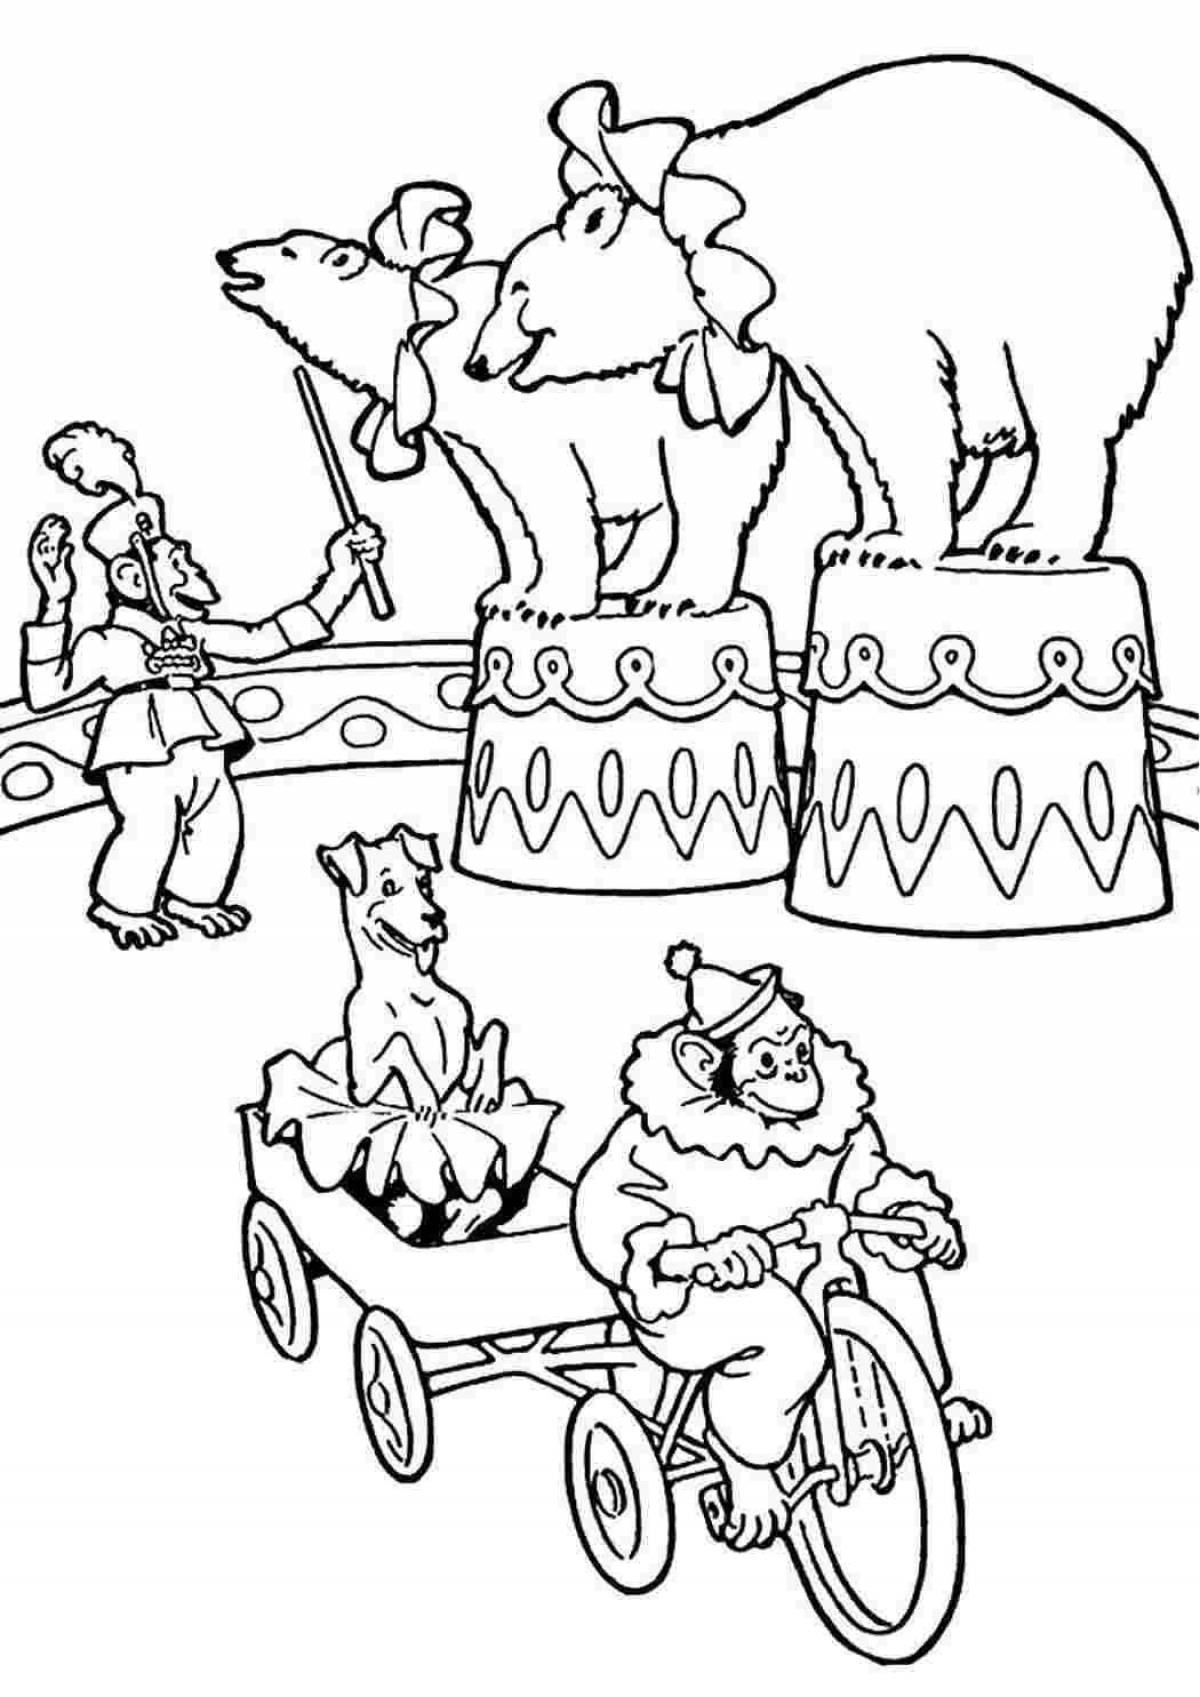 Coloring page festive circus arena